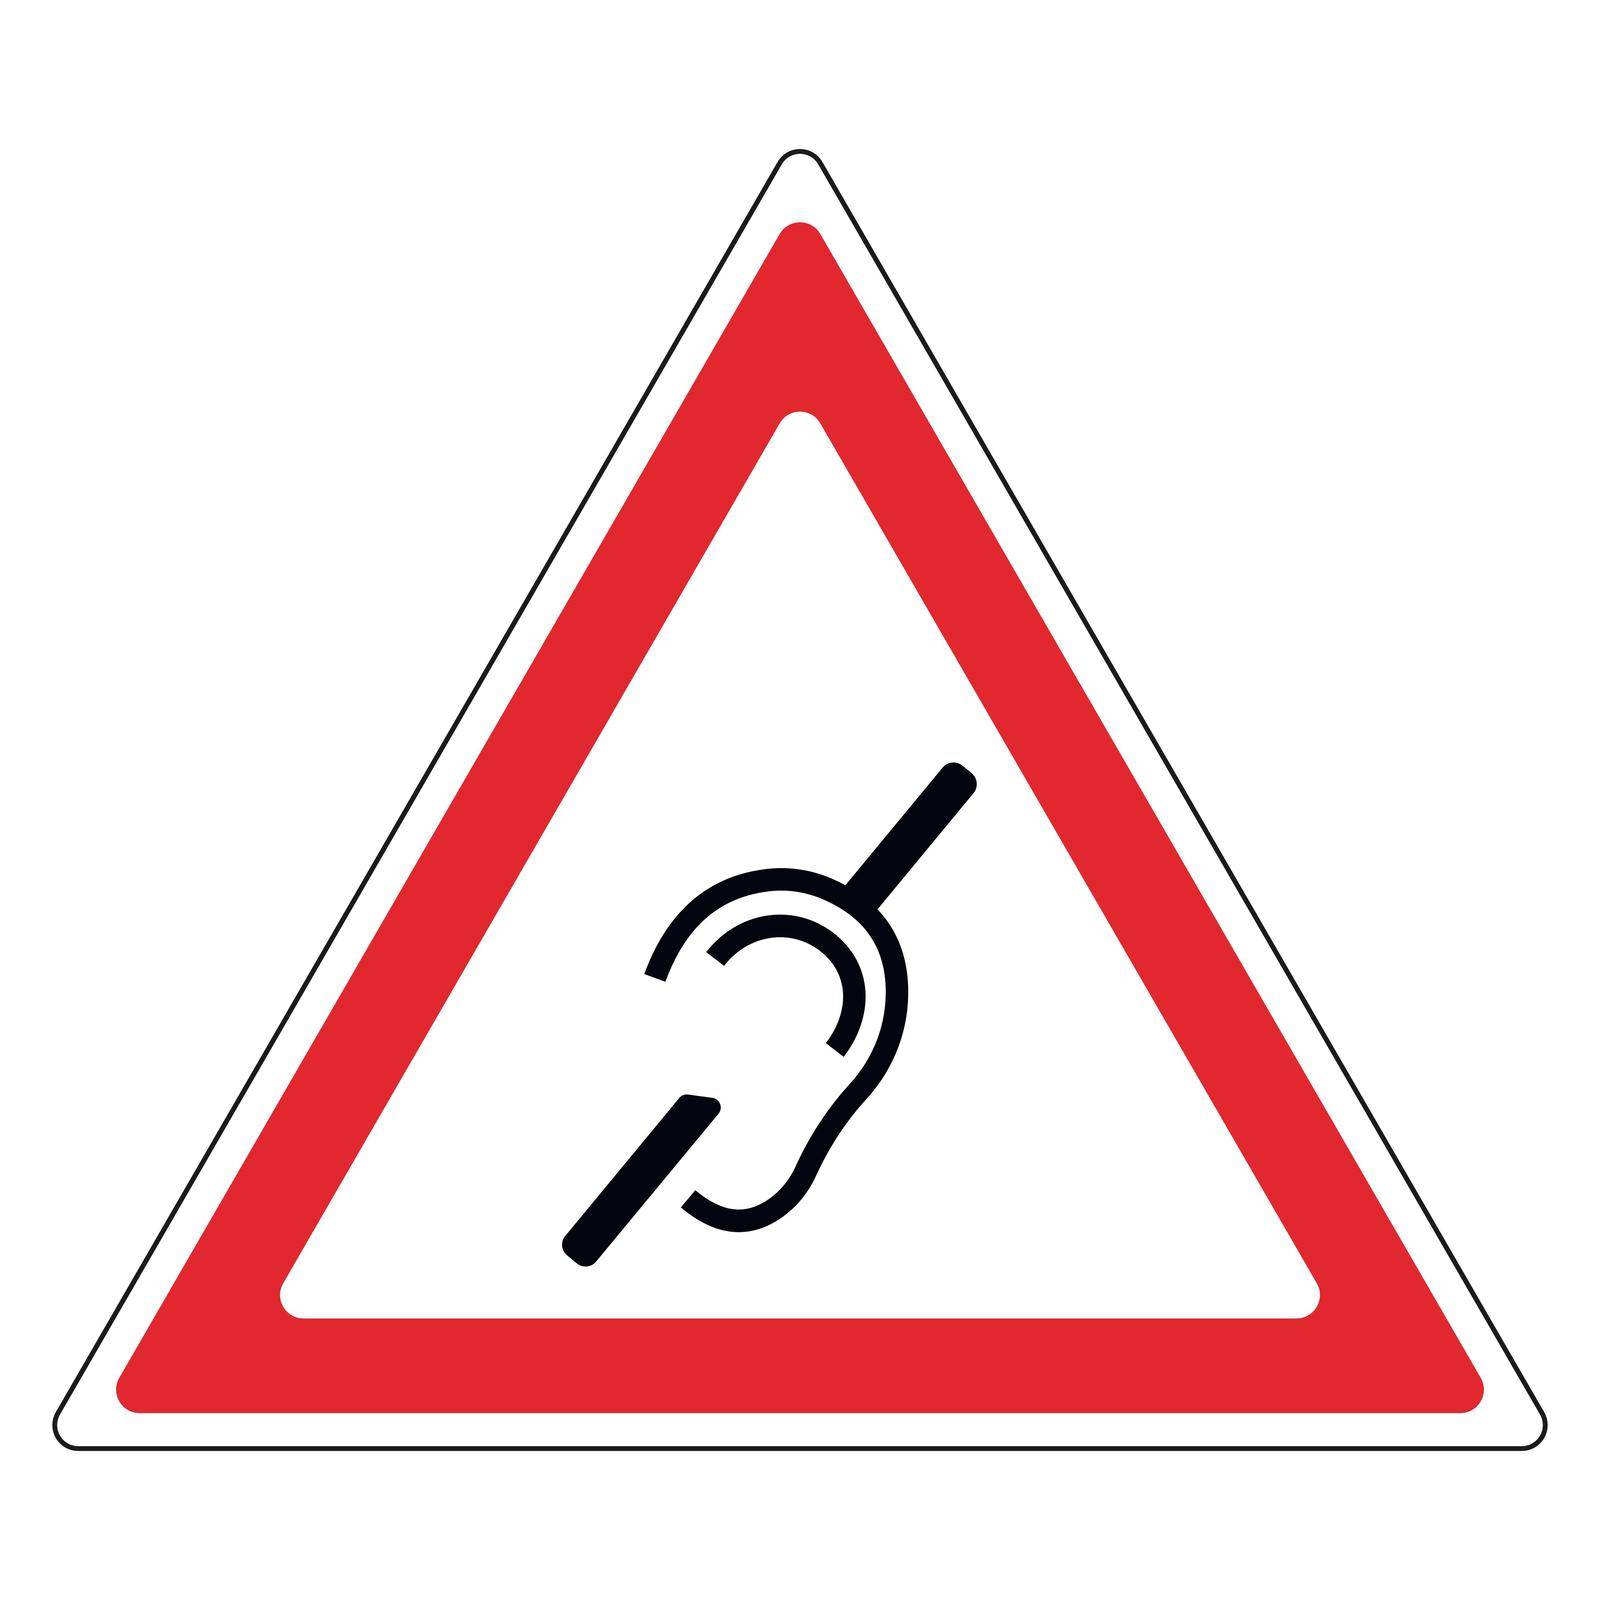 Hearing loss. Also known as hearing impairment, or anacusis, is a partial or total inability to hear, warning road sign, vector red triangle